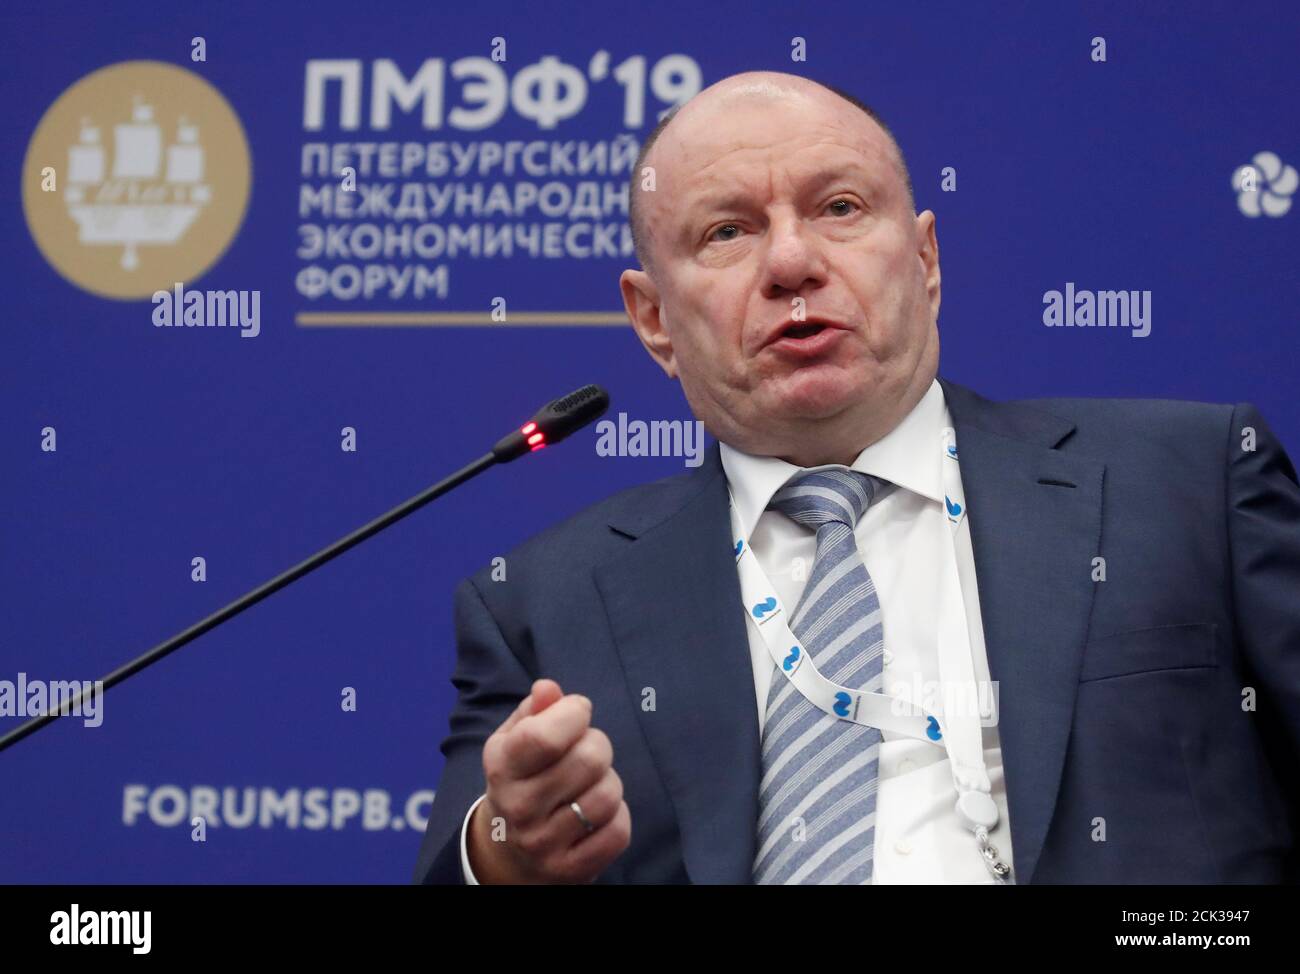 President and Chairman of the Board of MMC Norilsk Nickel Vladimir Potanin attends a session of the St. Petersburg International Economic Forum (SPIEF), Russia June 6, 2019. REUTERS/Maxim Shemetov Stock Photo